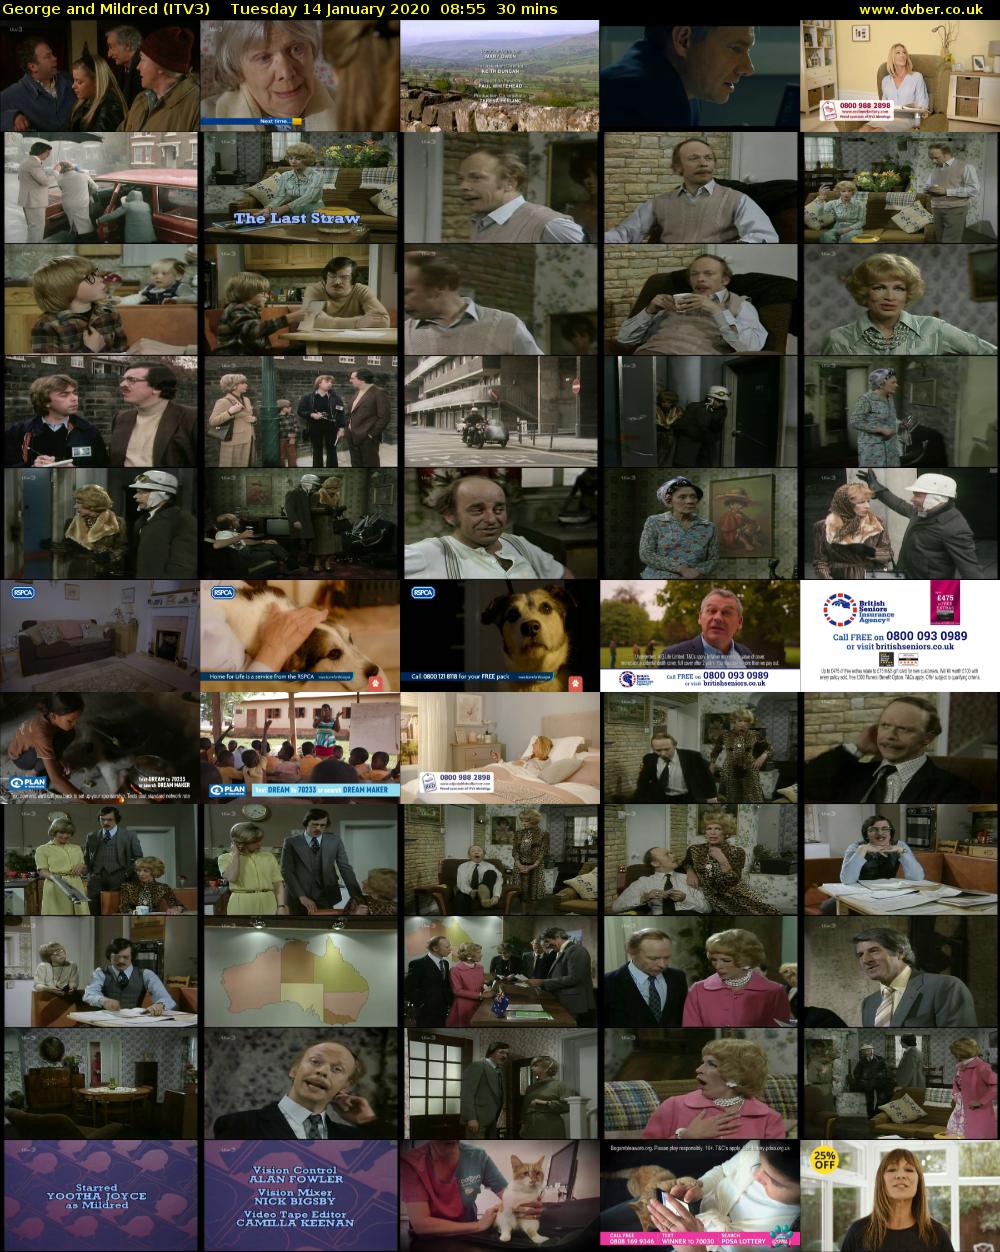 George and Mildred (ITV3) Tuesday 14 January 2020 08:55 - 09:25